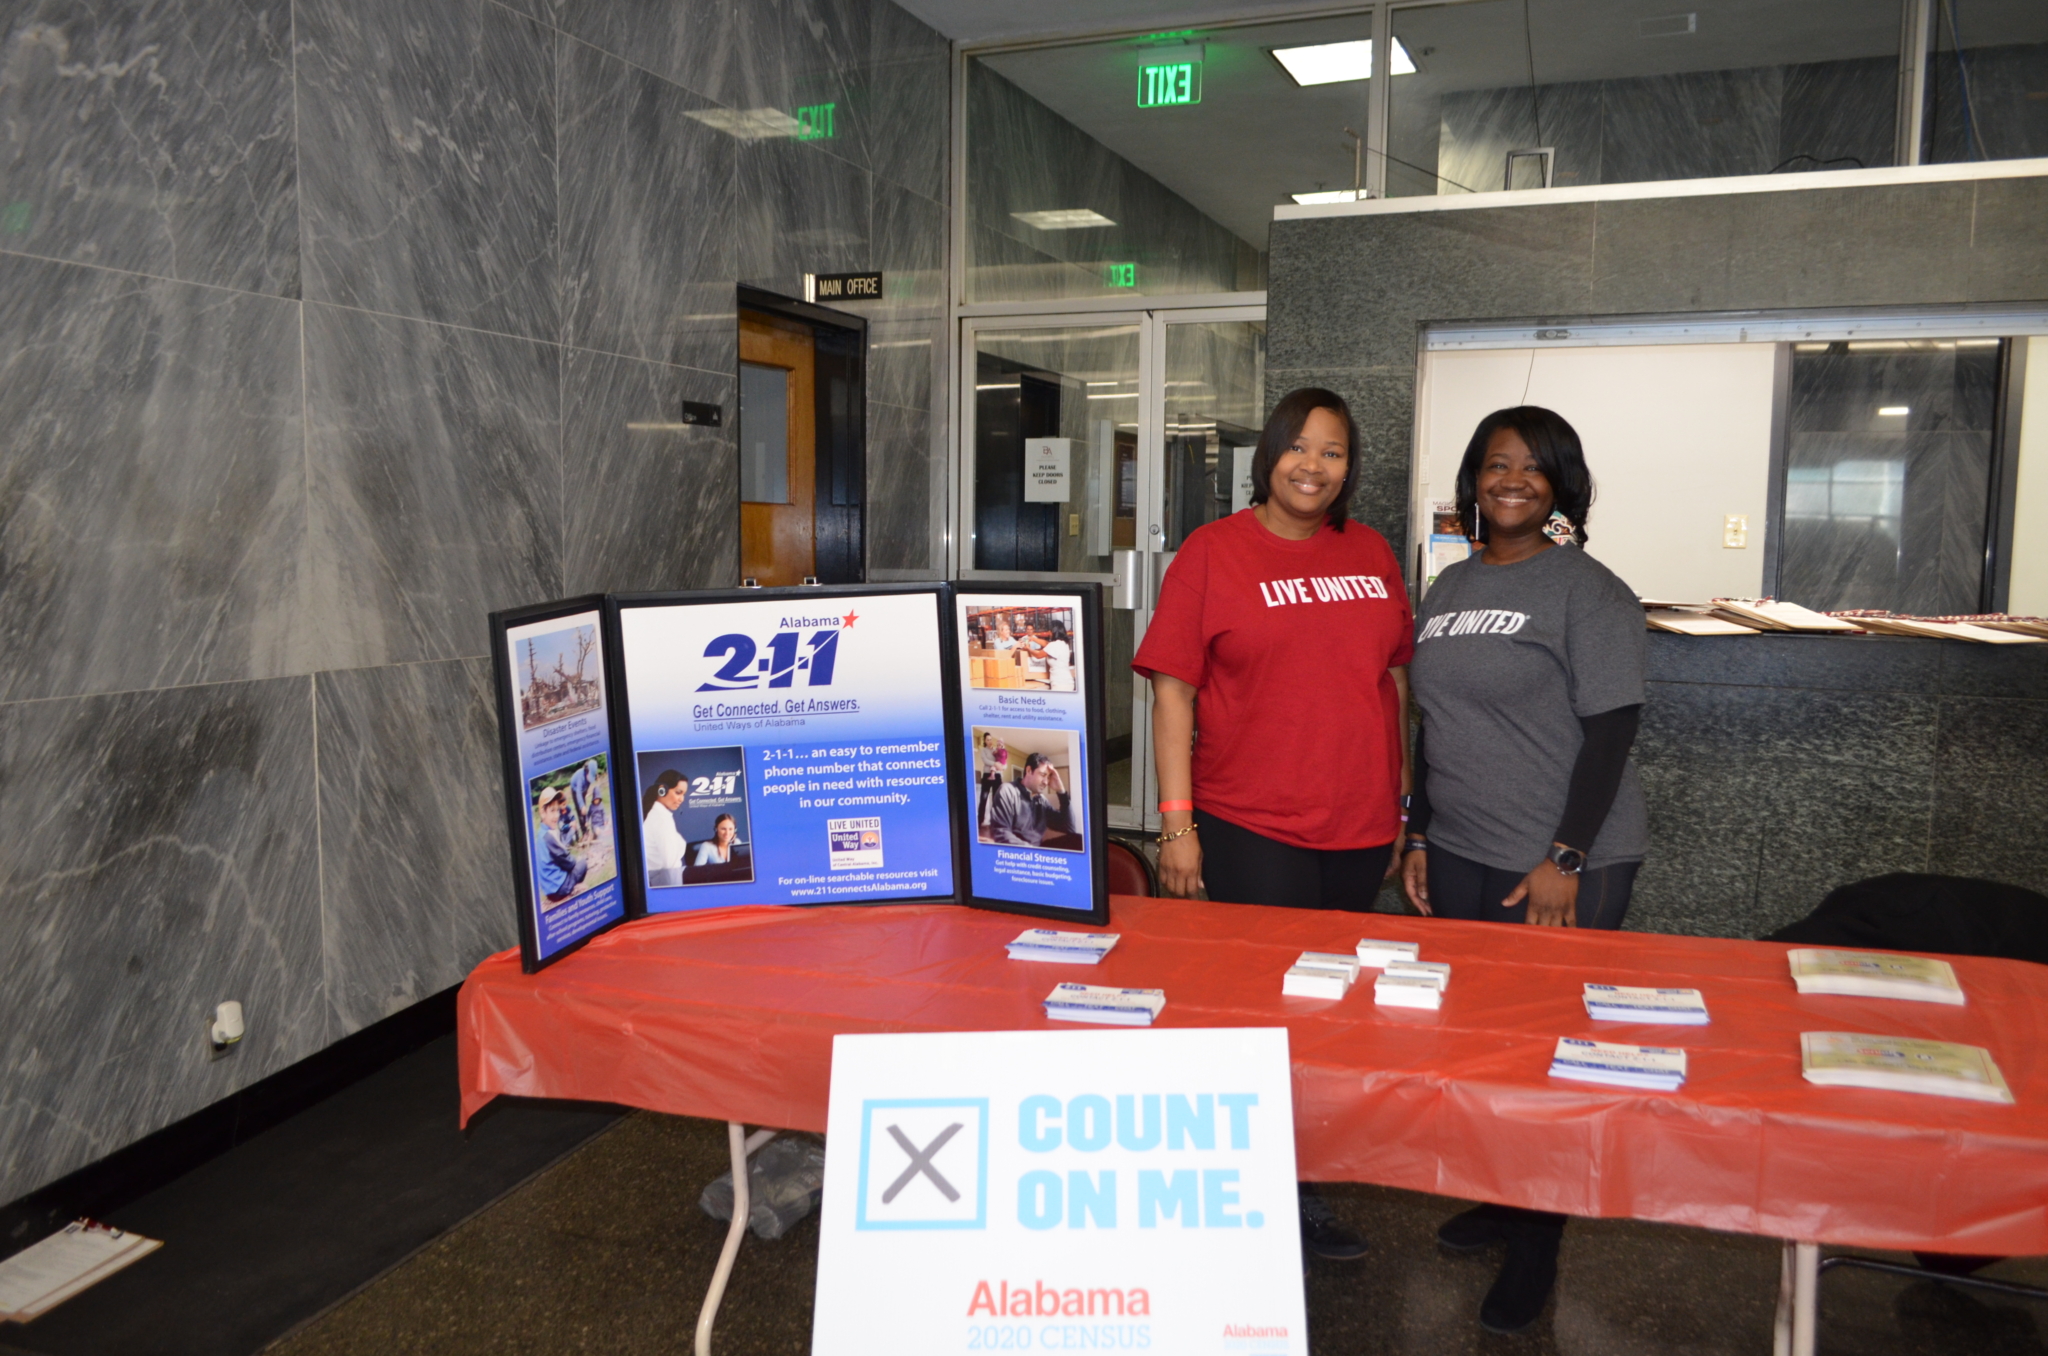 United Way 2 1 1 Feature United Way’s 2-1-1 has financial resources available if you have been impacted by COVID-19